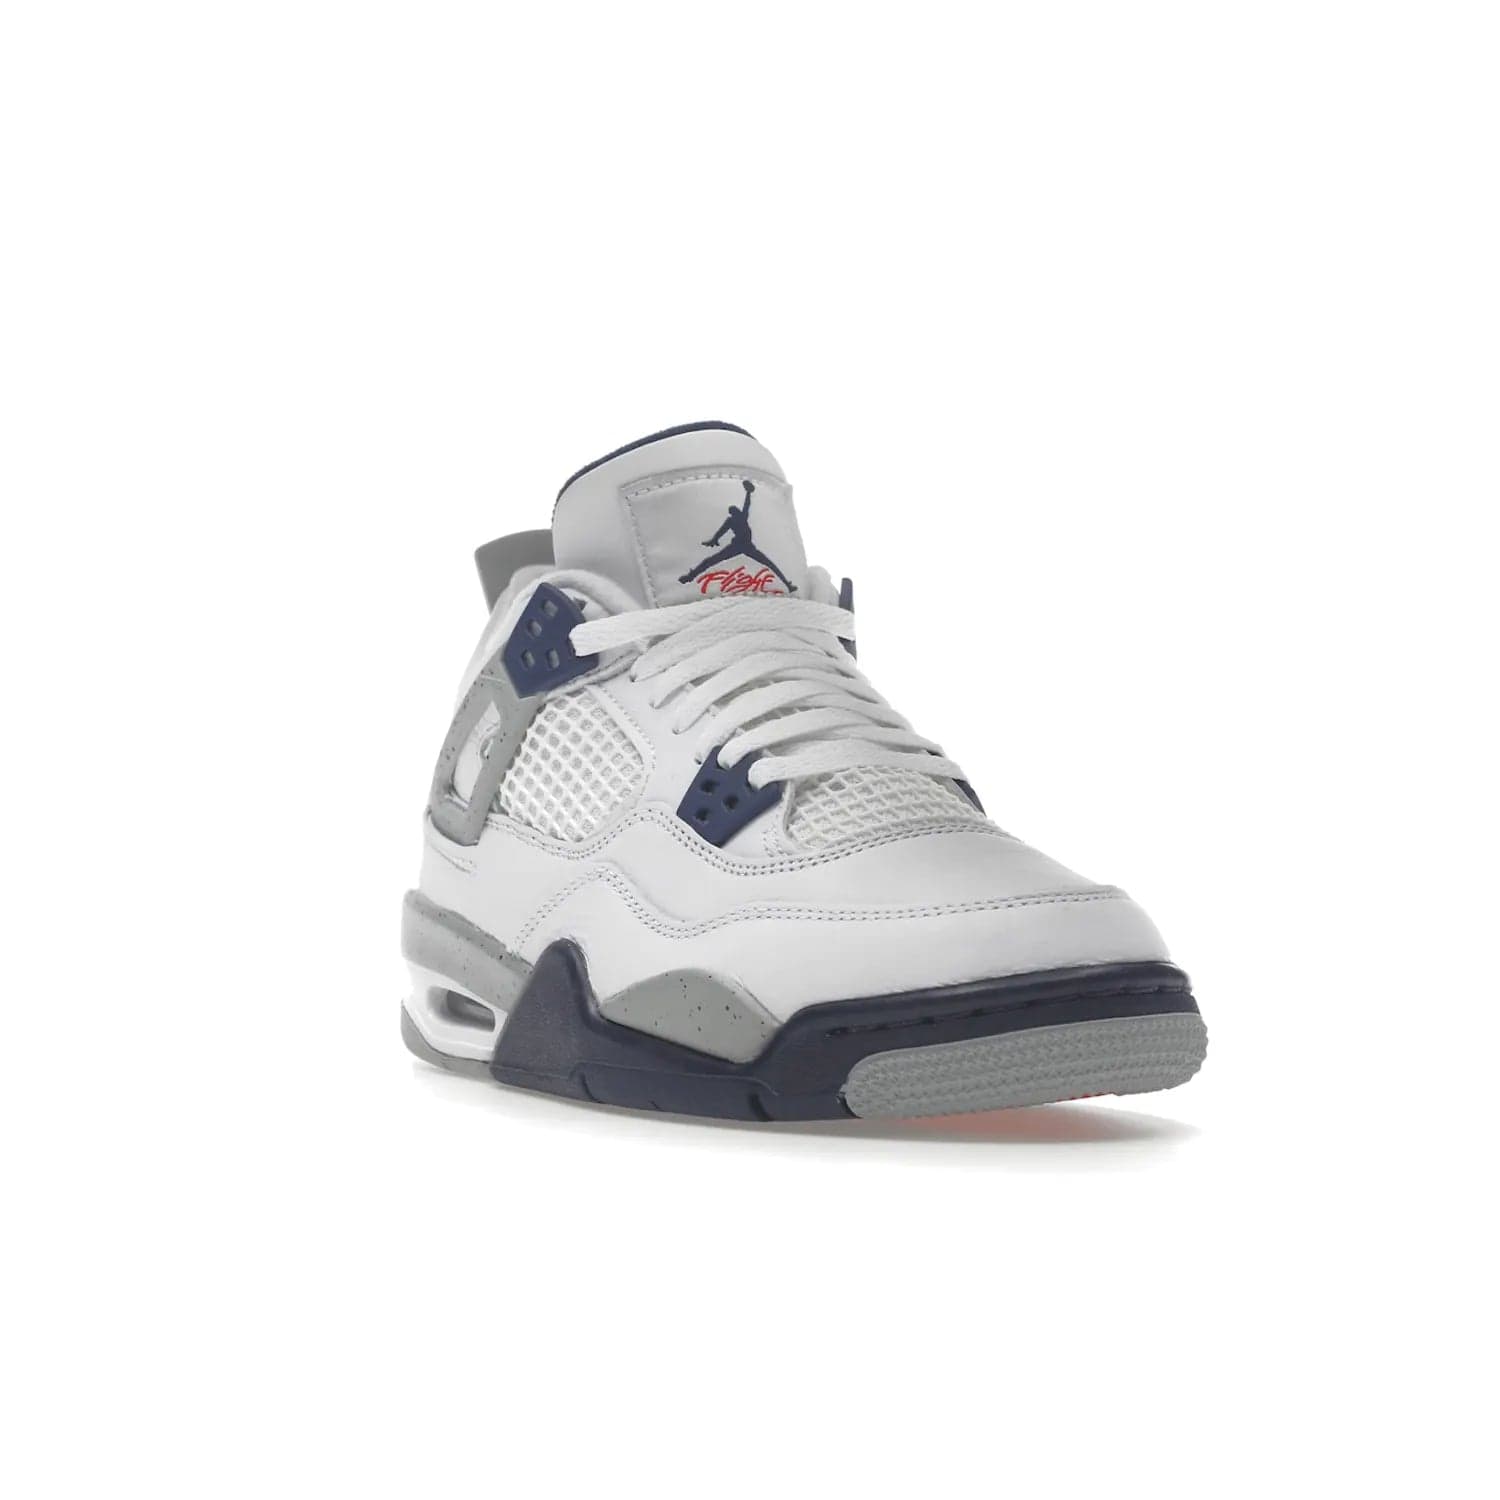 Jordan 4 Retro Midnight Navy (GS) - Image 7 - Only at www.BallersClubKickz.com - Shop the Air Jordan 4 Retro Midnight Navy GS. The white leather upper features black support wings & heel tab, navy eyelets & woven tongue tag with Jumpman logos. The midsole features two-tone polyurethane insole & AIR units in the heel & forefoot. Get the white/midnight navy/light smoke grey/fire colorway & show off your style.